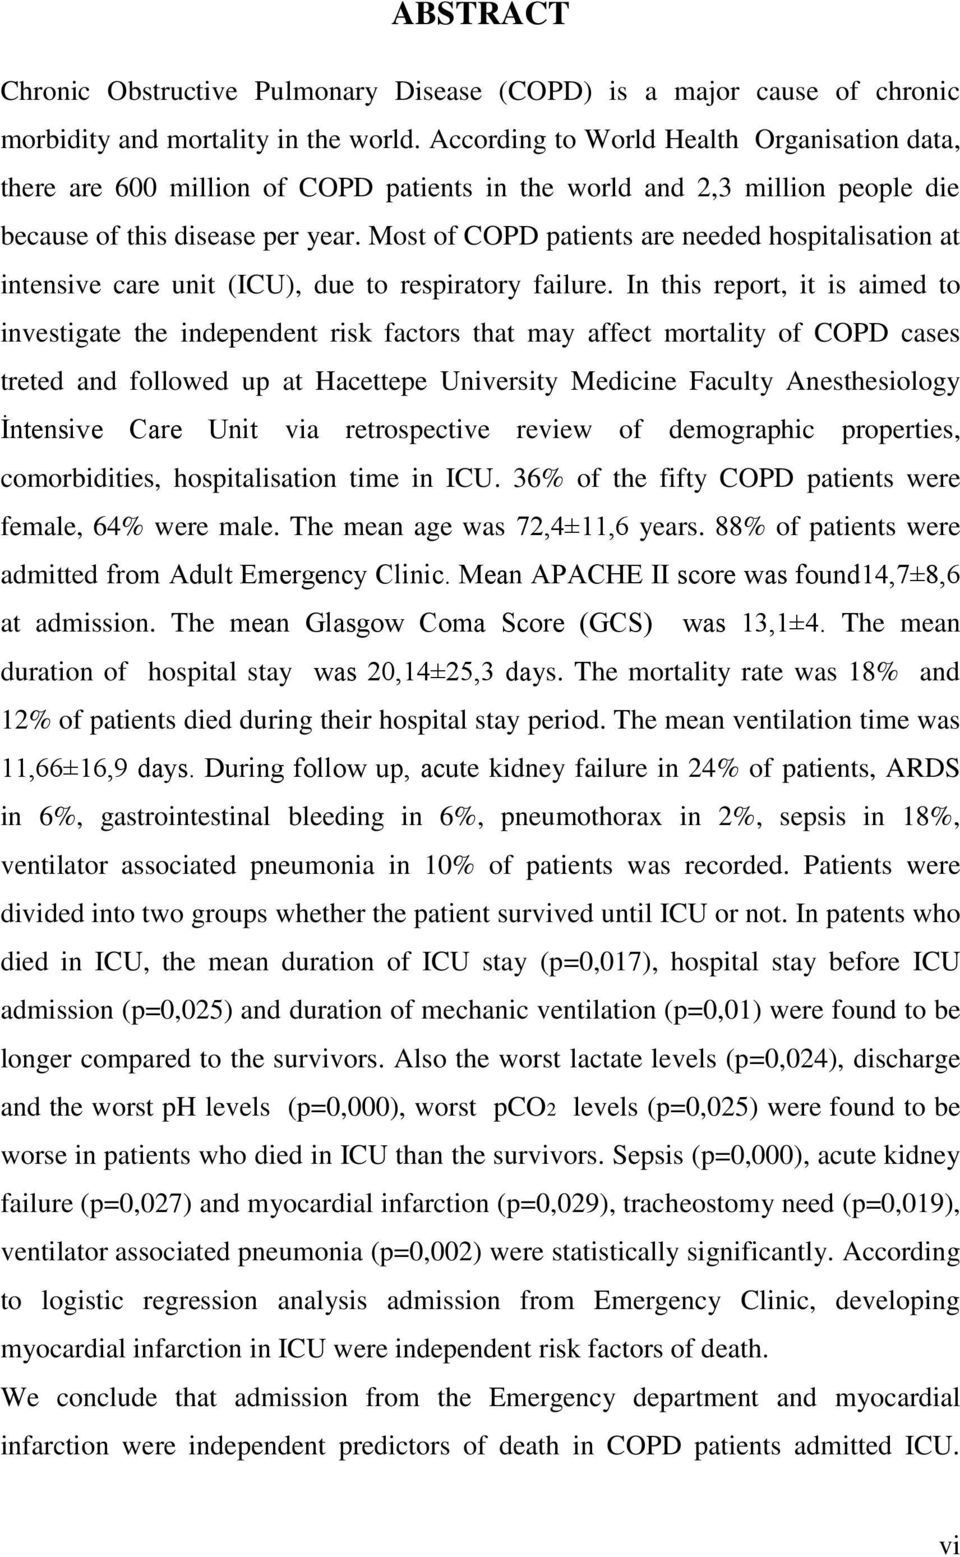 Most of COPD patients are needed hospitalisation at intensive care unit (ICU), due to respiratory failure.